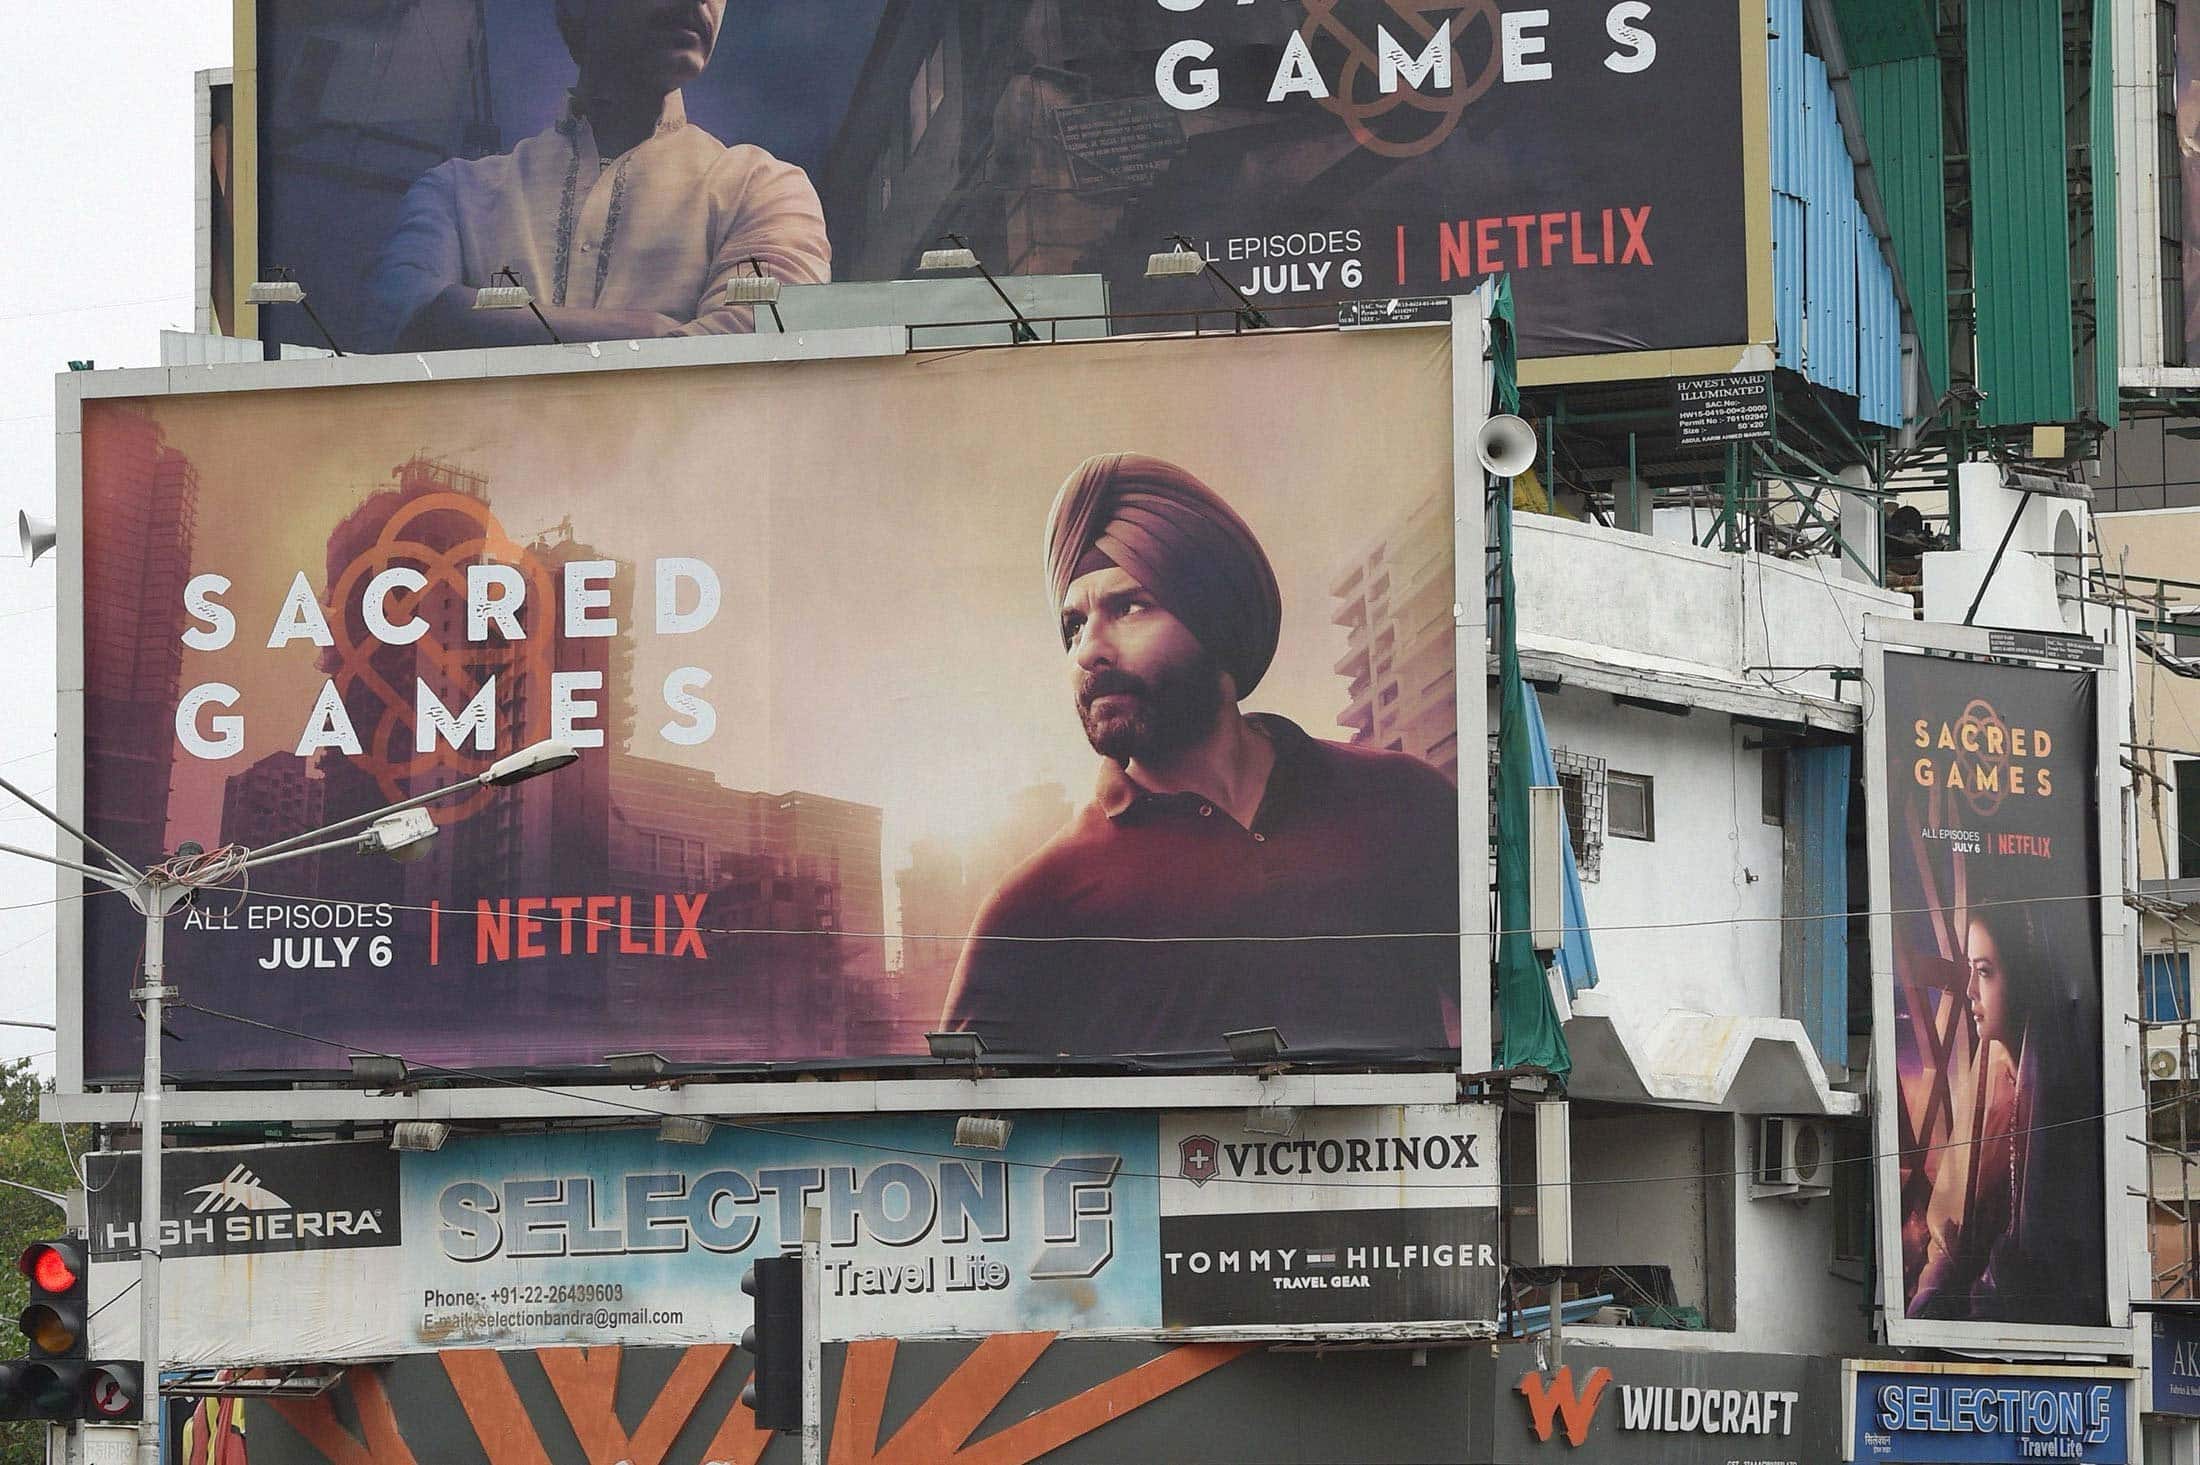 Billboard that shows Sacred Games, a very popular Indian series on Netflix